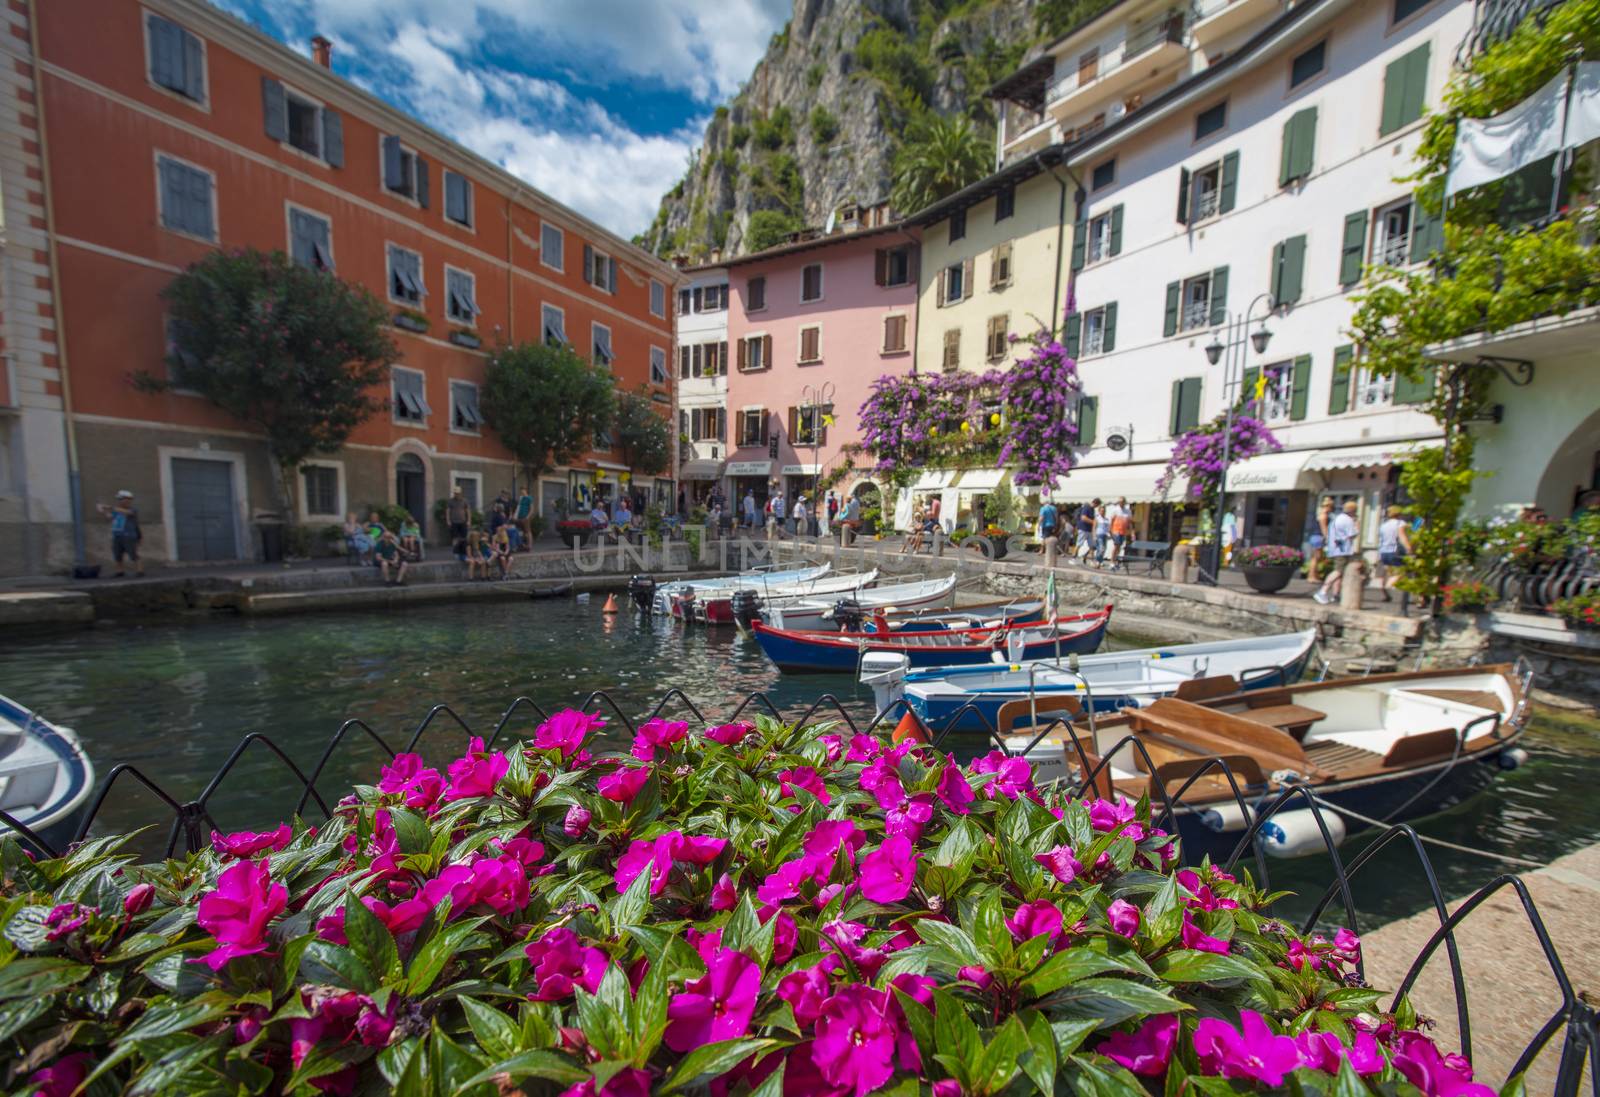 Limone, Lake Garda, Italy, August 2019, A view of the small town of Limone